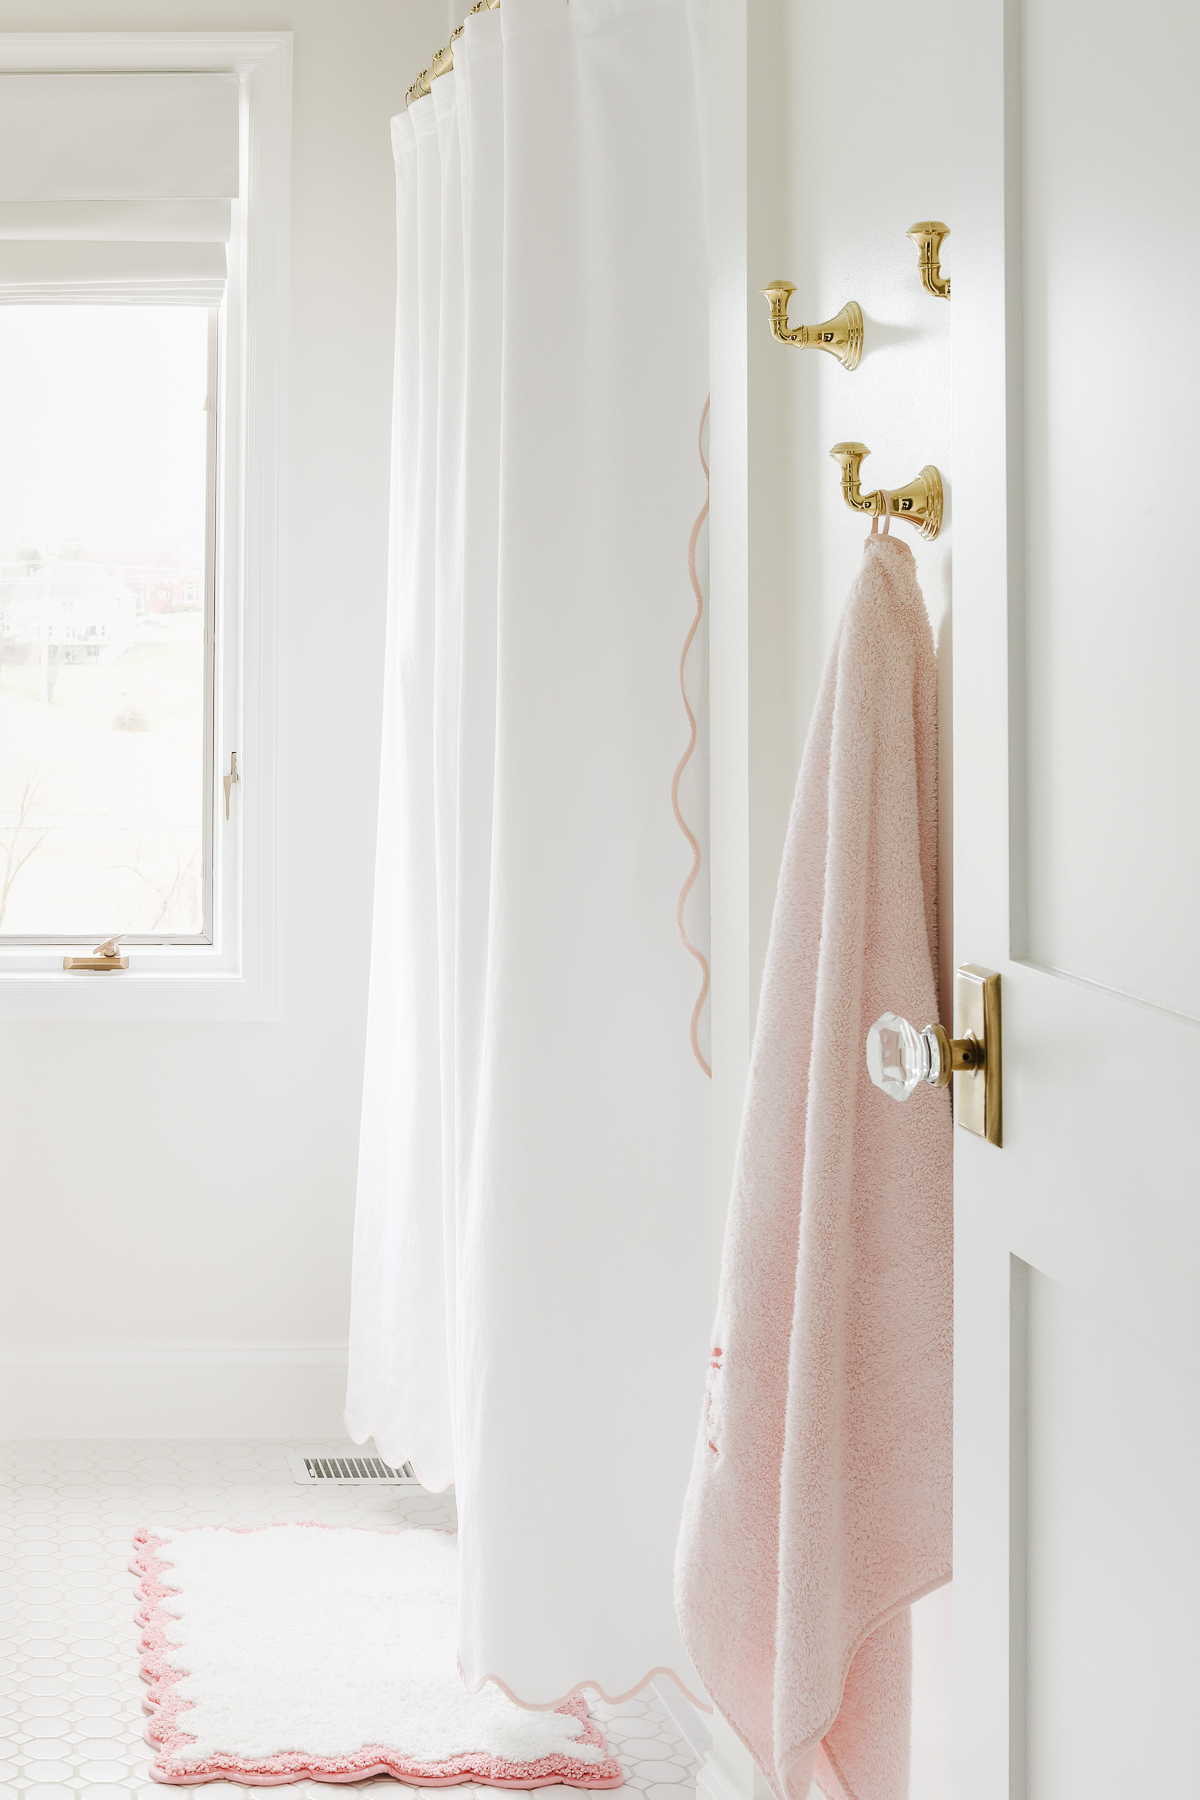 A Benjamin Moore White Dove painted bathroom with a pink rug and shower curtain.